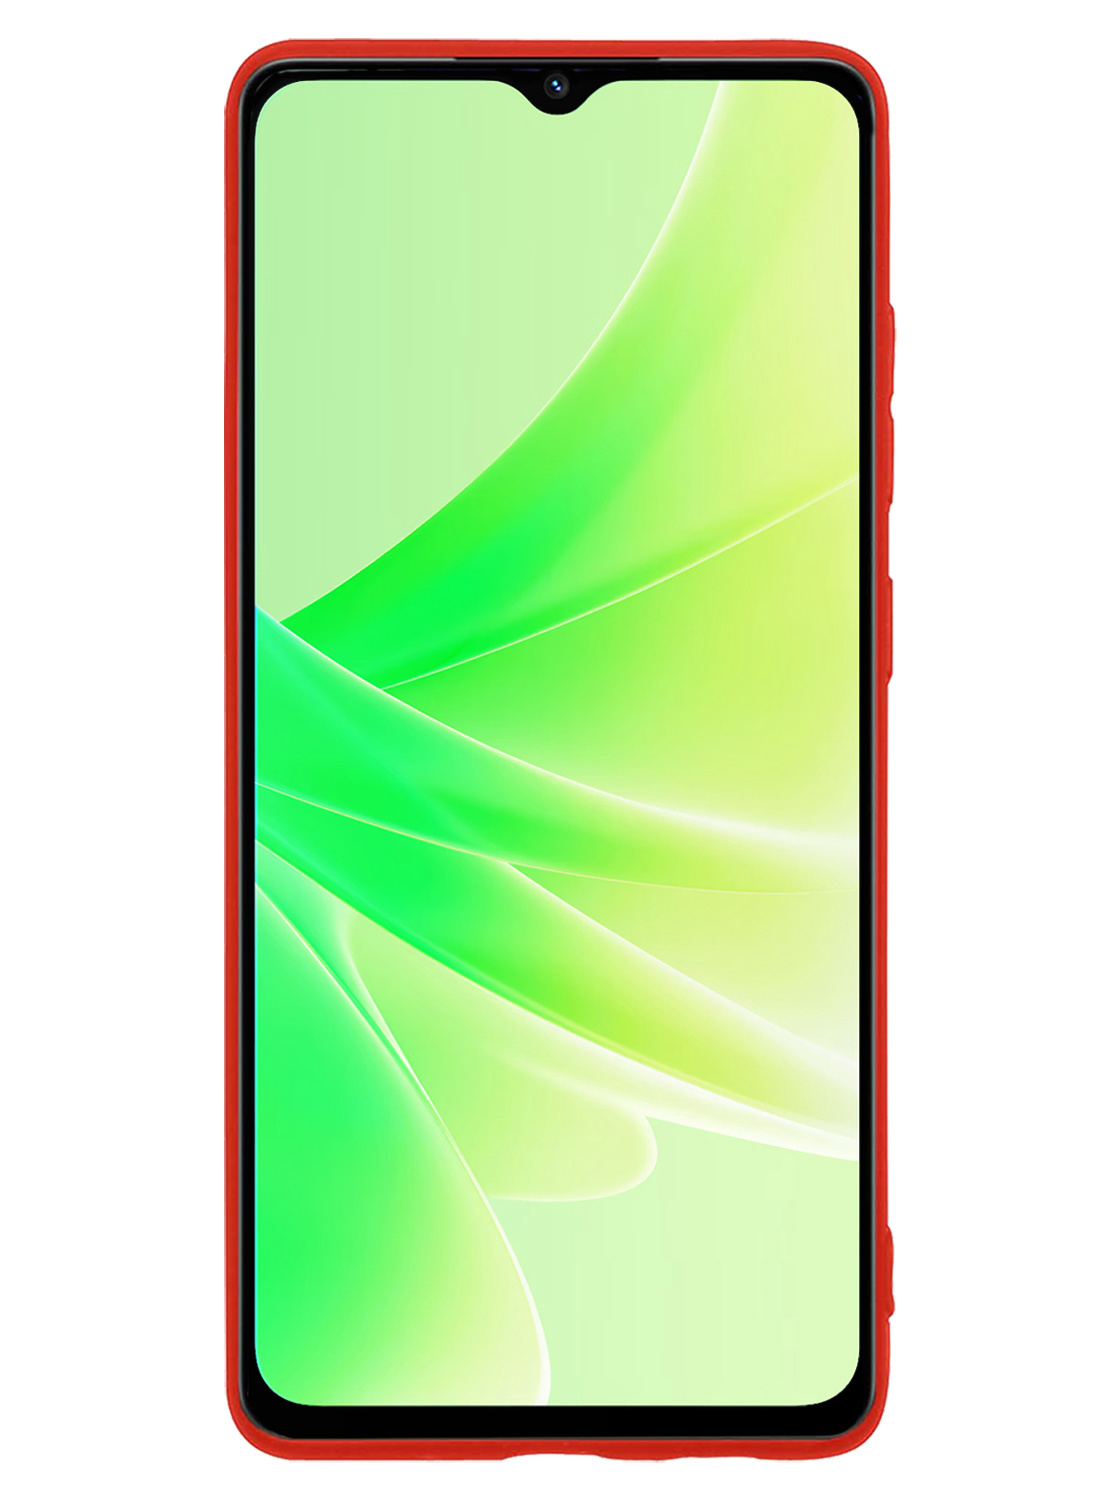 Nomfy OPPO A57s Hoesje Siliconen Case Back Cover Met Screenprotector - OPPO A57s Hoes Cover Silicone - Rood